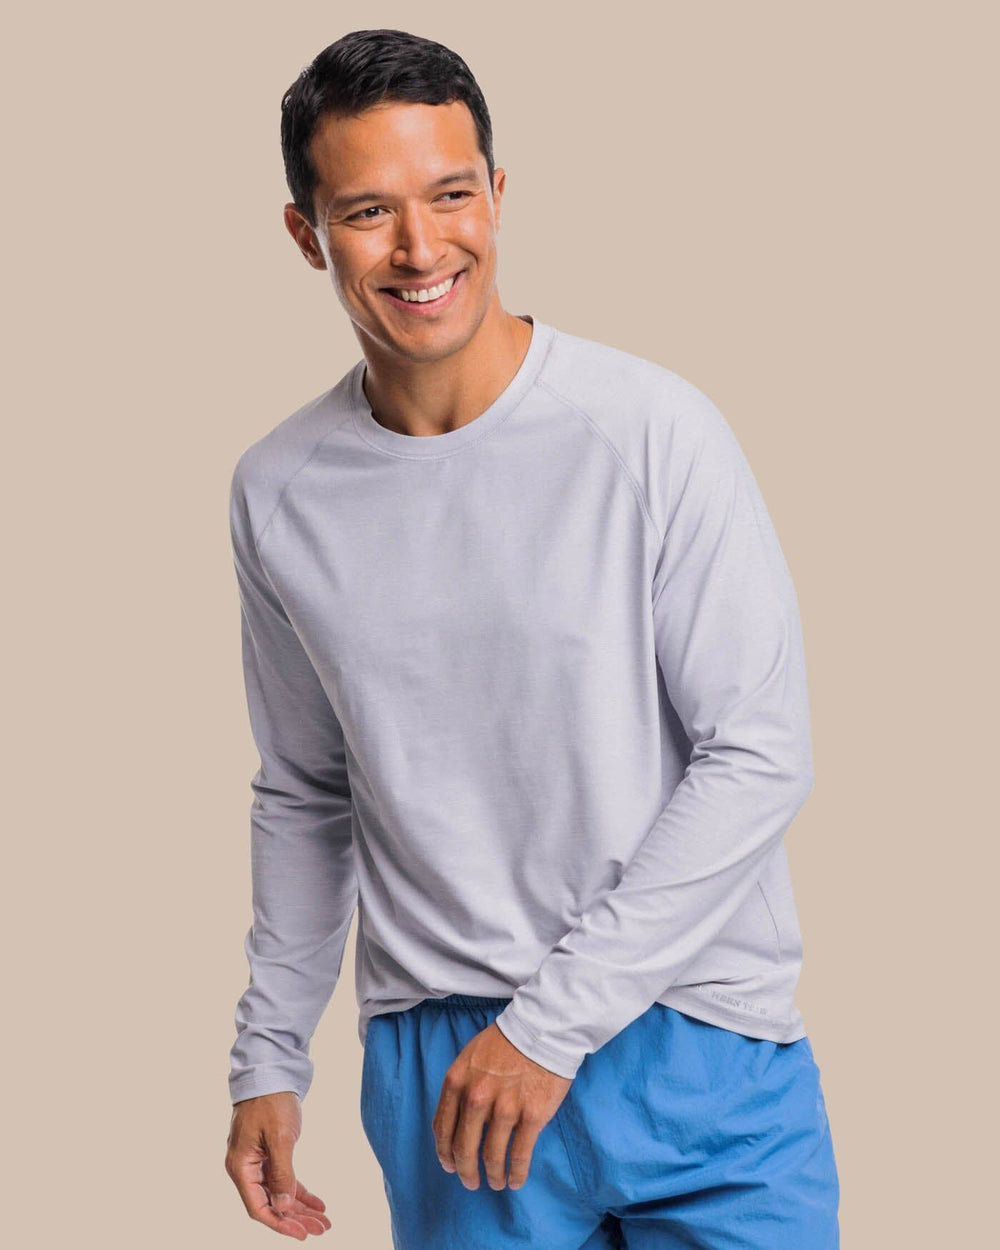 The front view of the Southern Tide brrr-illiant Performance Long Sleeve Tee by Southern Tide - Platinum Grey